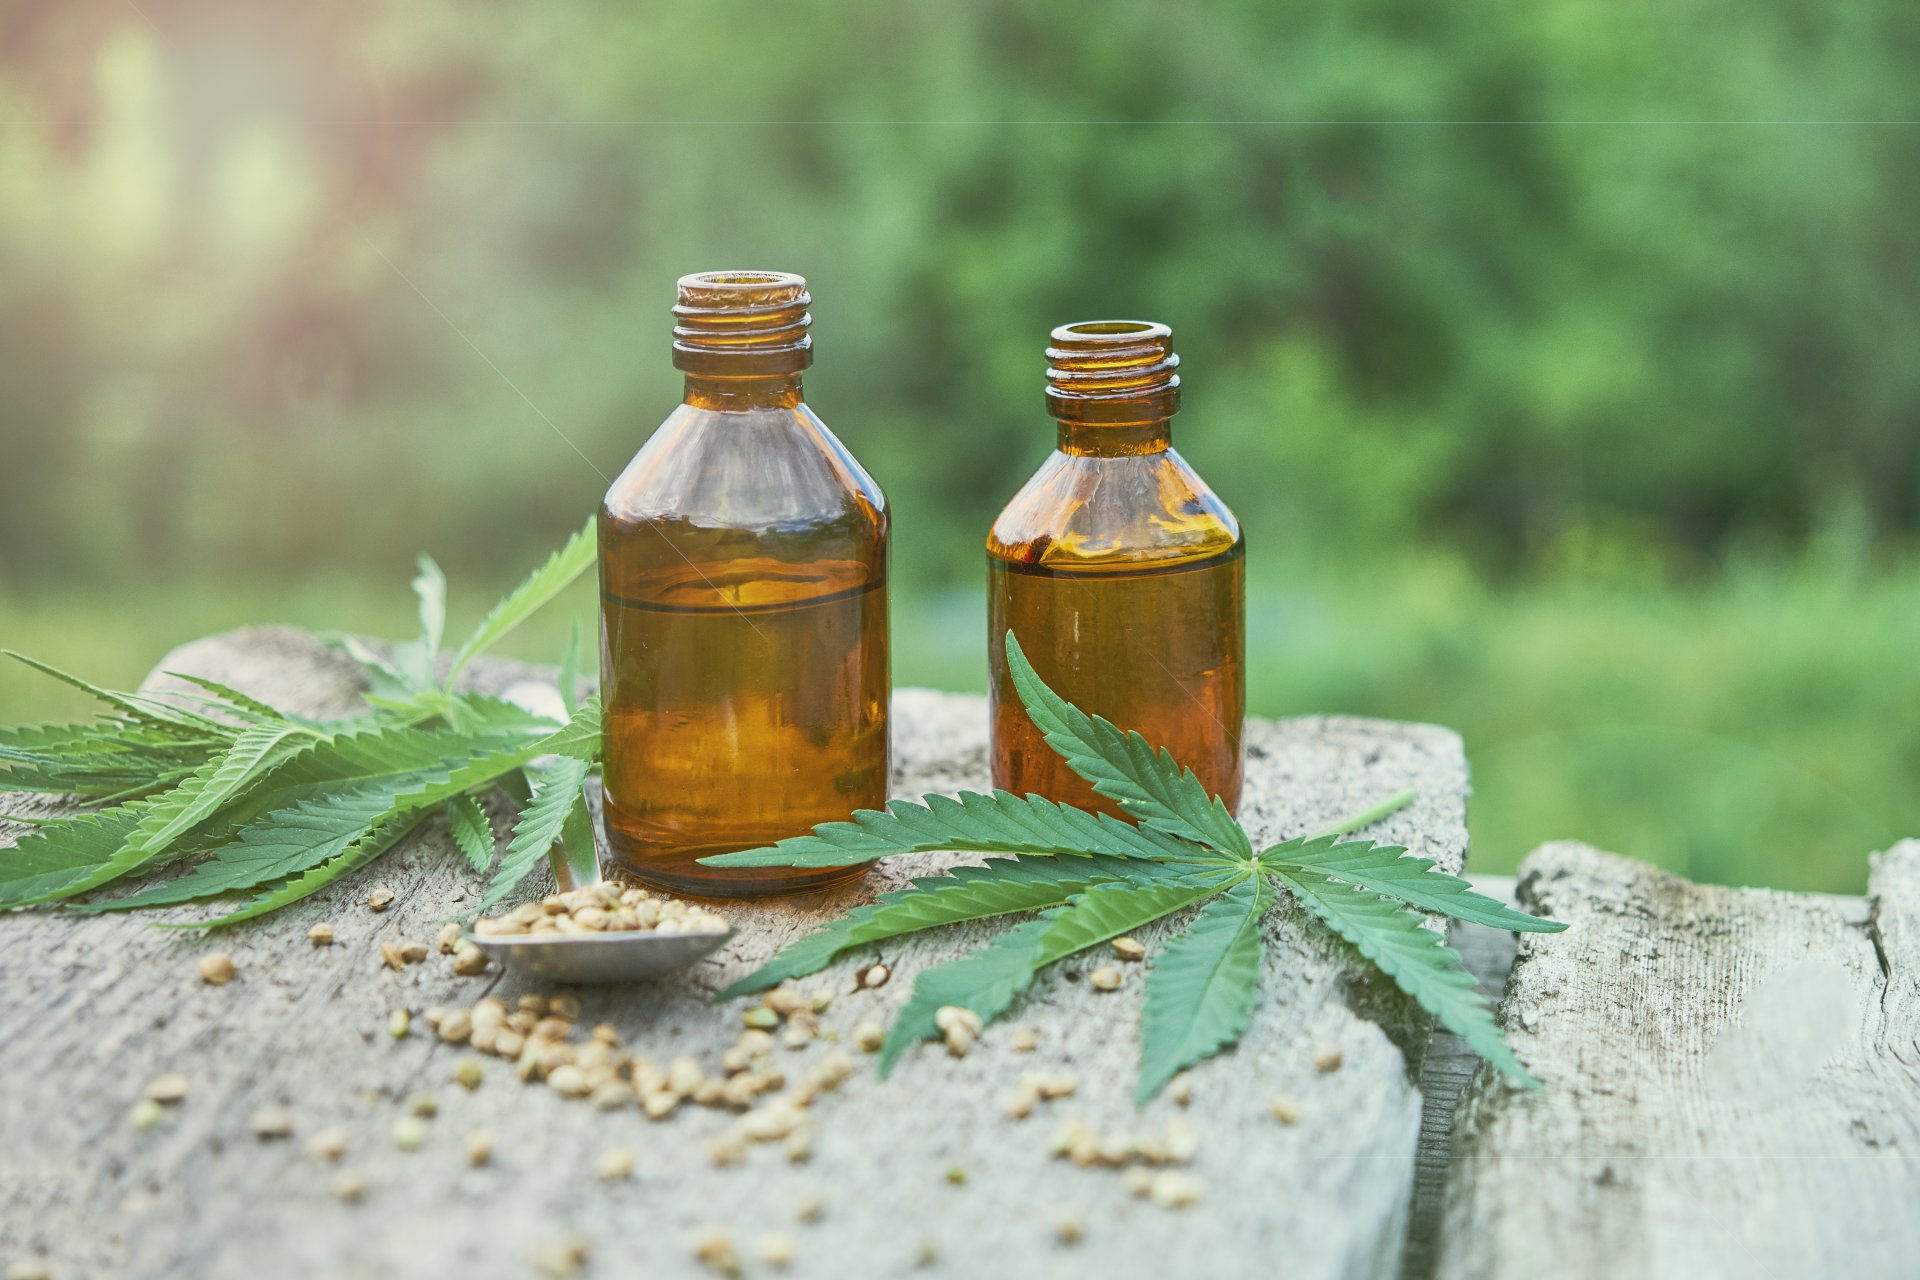 Two brown bottles on a rock surrounded by 2 cannabis leaves and cannabis seeds.